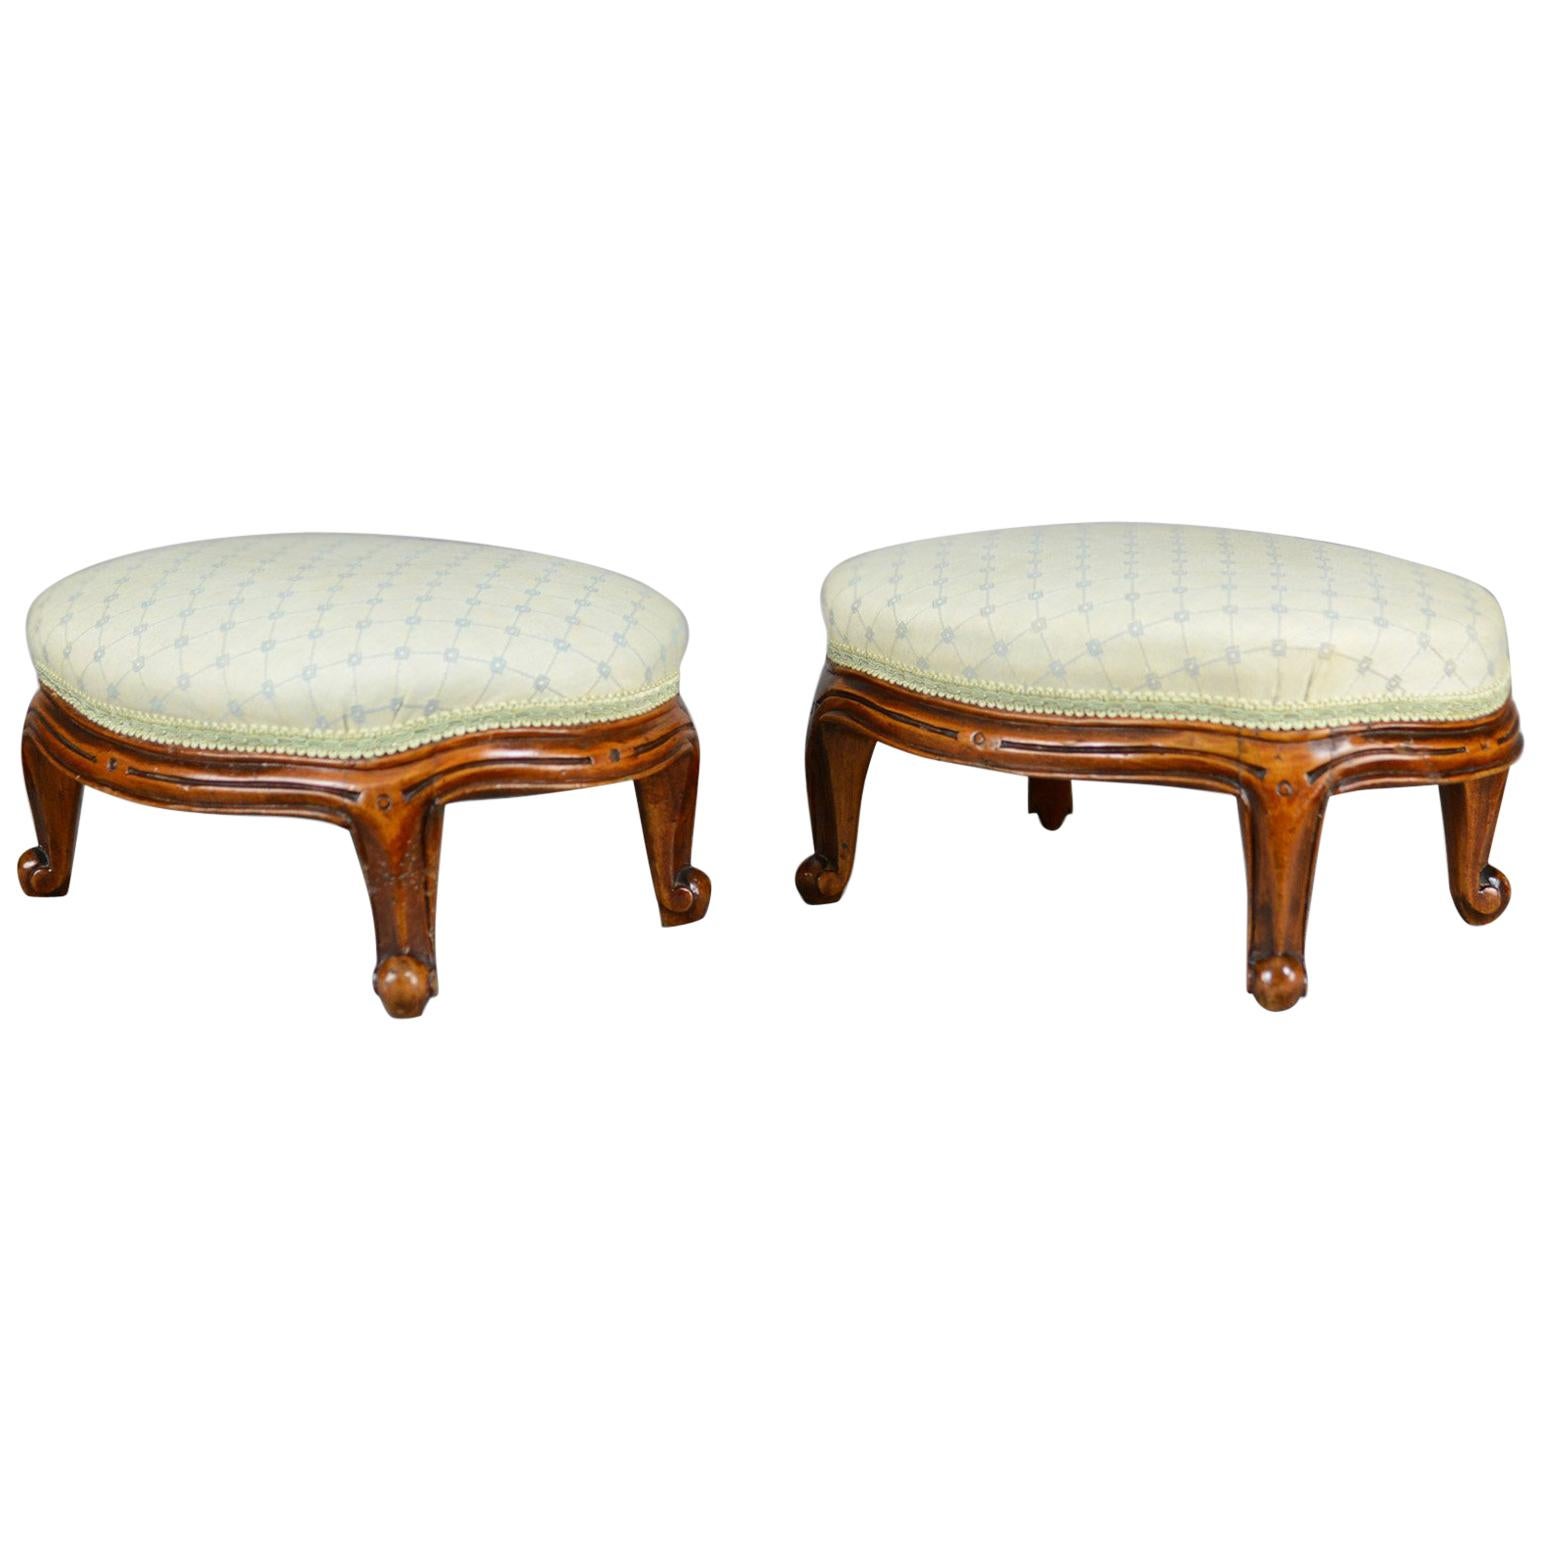 Pair of Antique Foot Stools, English, Victorian, Carriage Rests, circa 1890